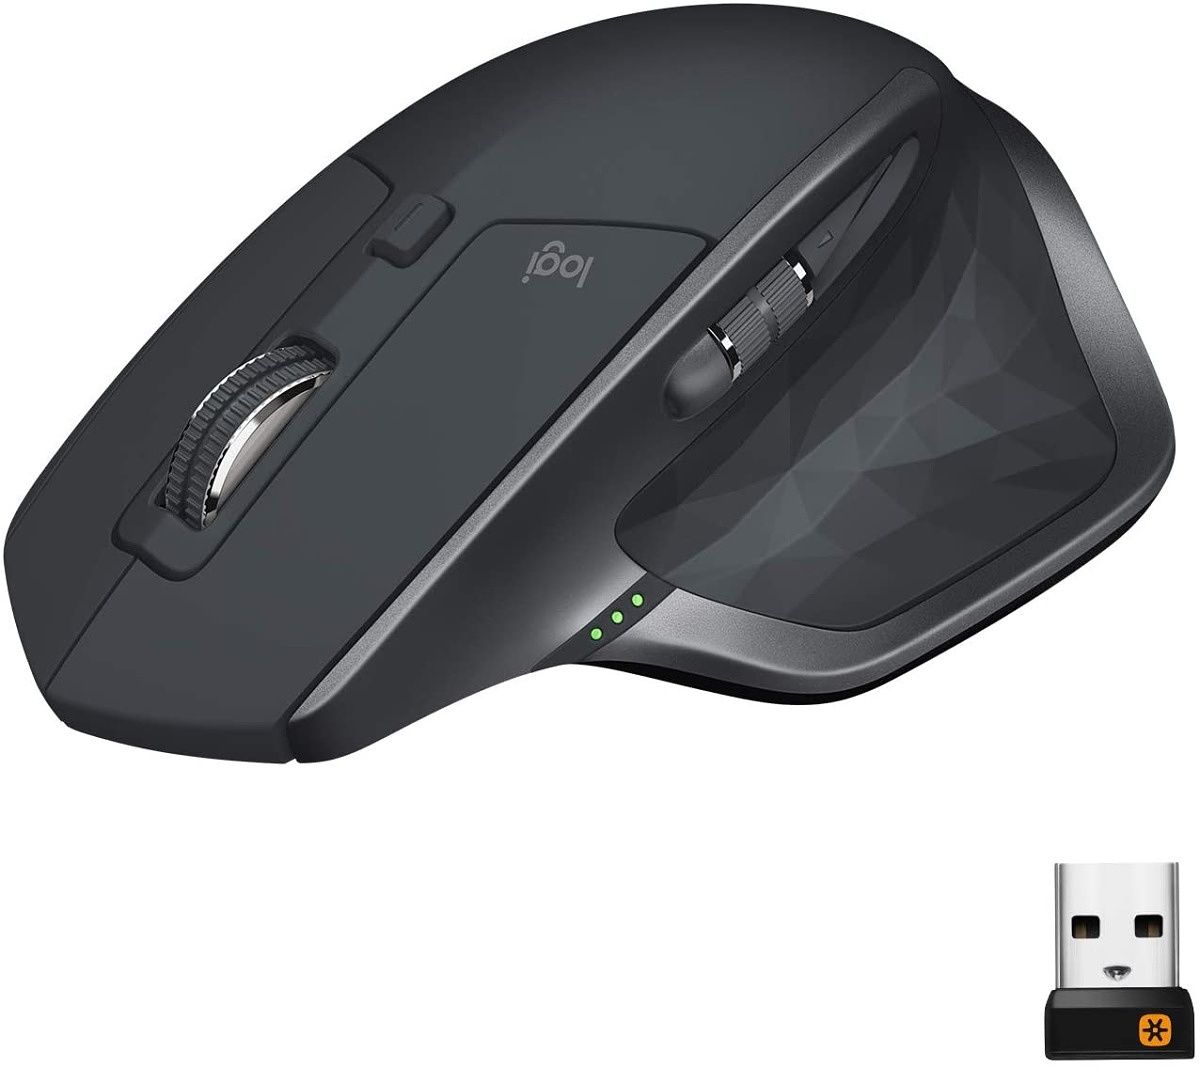 The Logitech MX Master 2S is a fantastic productivity mouse with a high-precision sensor and an ergonomic design. It also allows you to control two PCs at the same time.